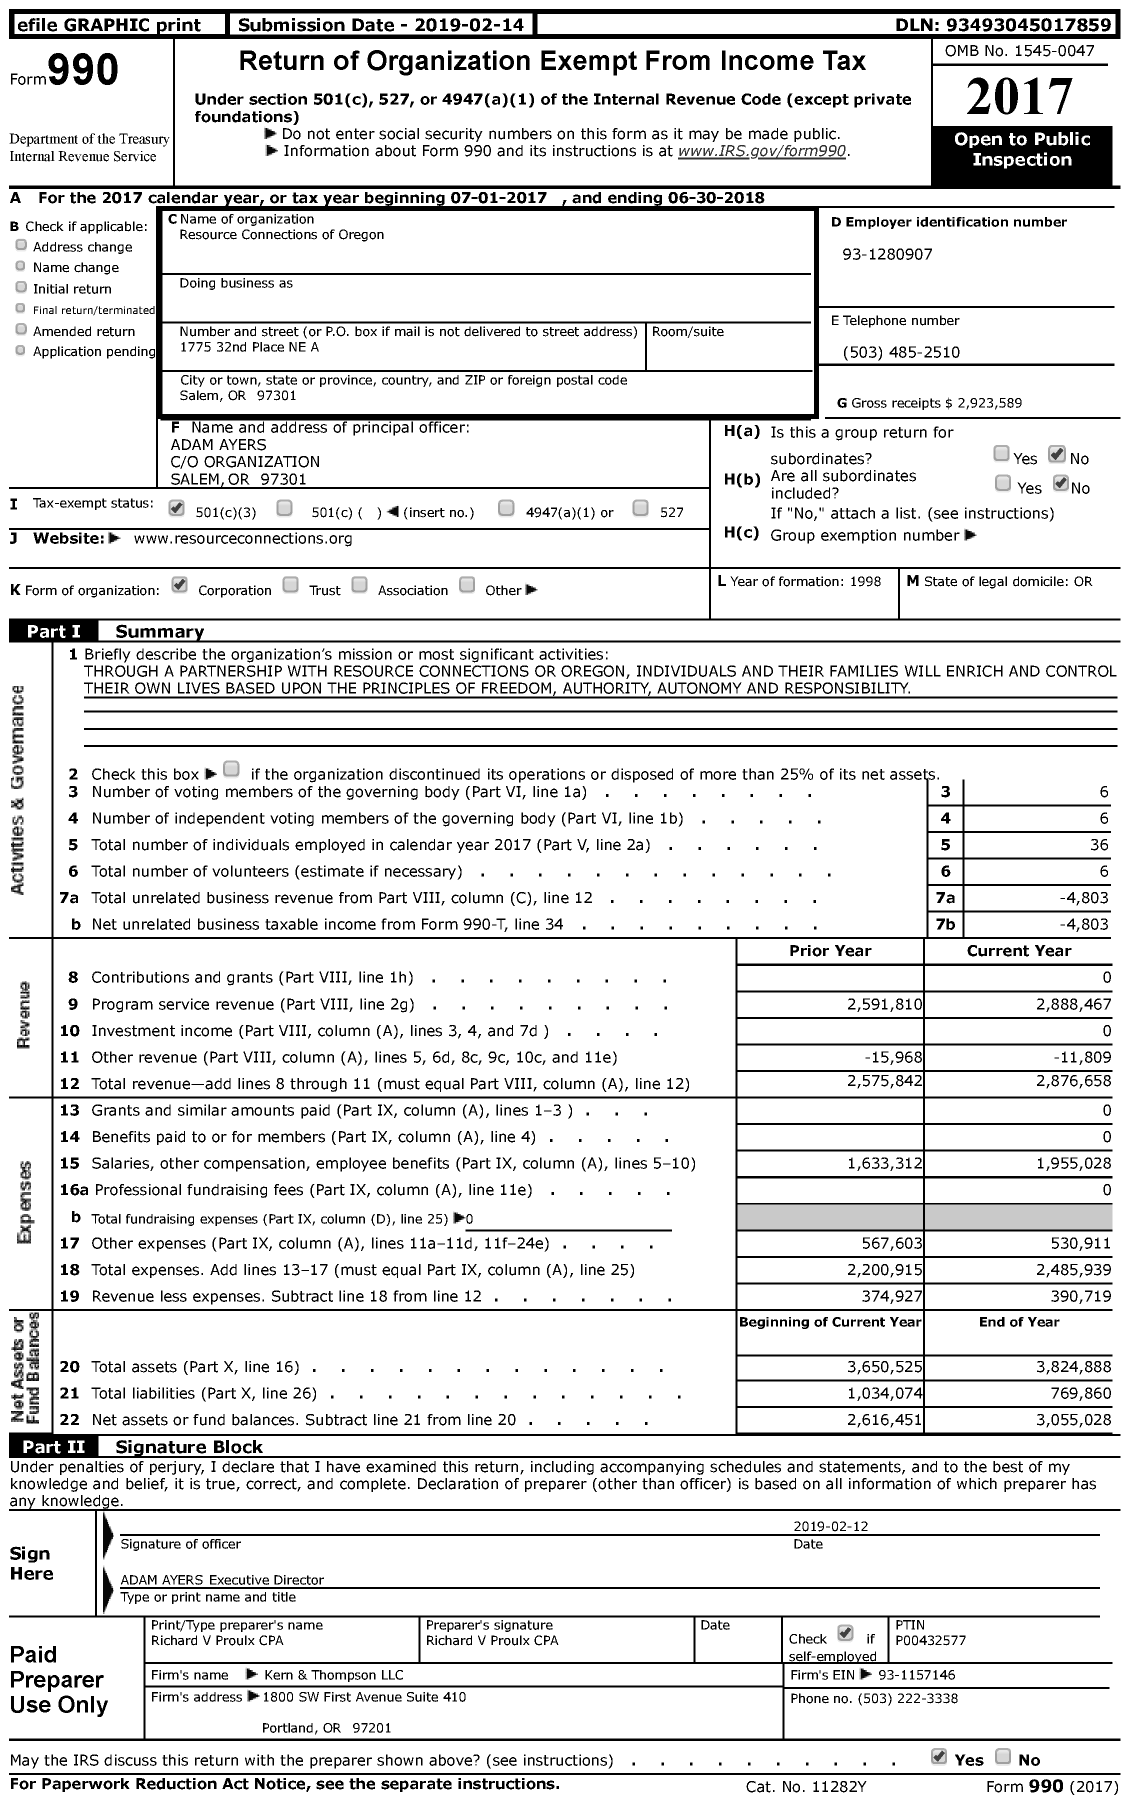 Image of first page of 2017 Form 990 for Resource Connections of Oregon (RCO)